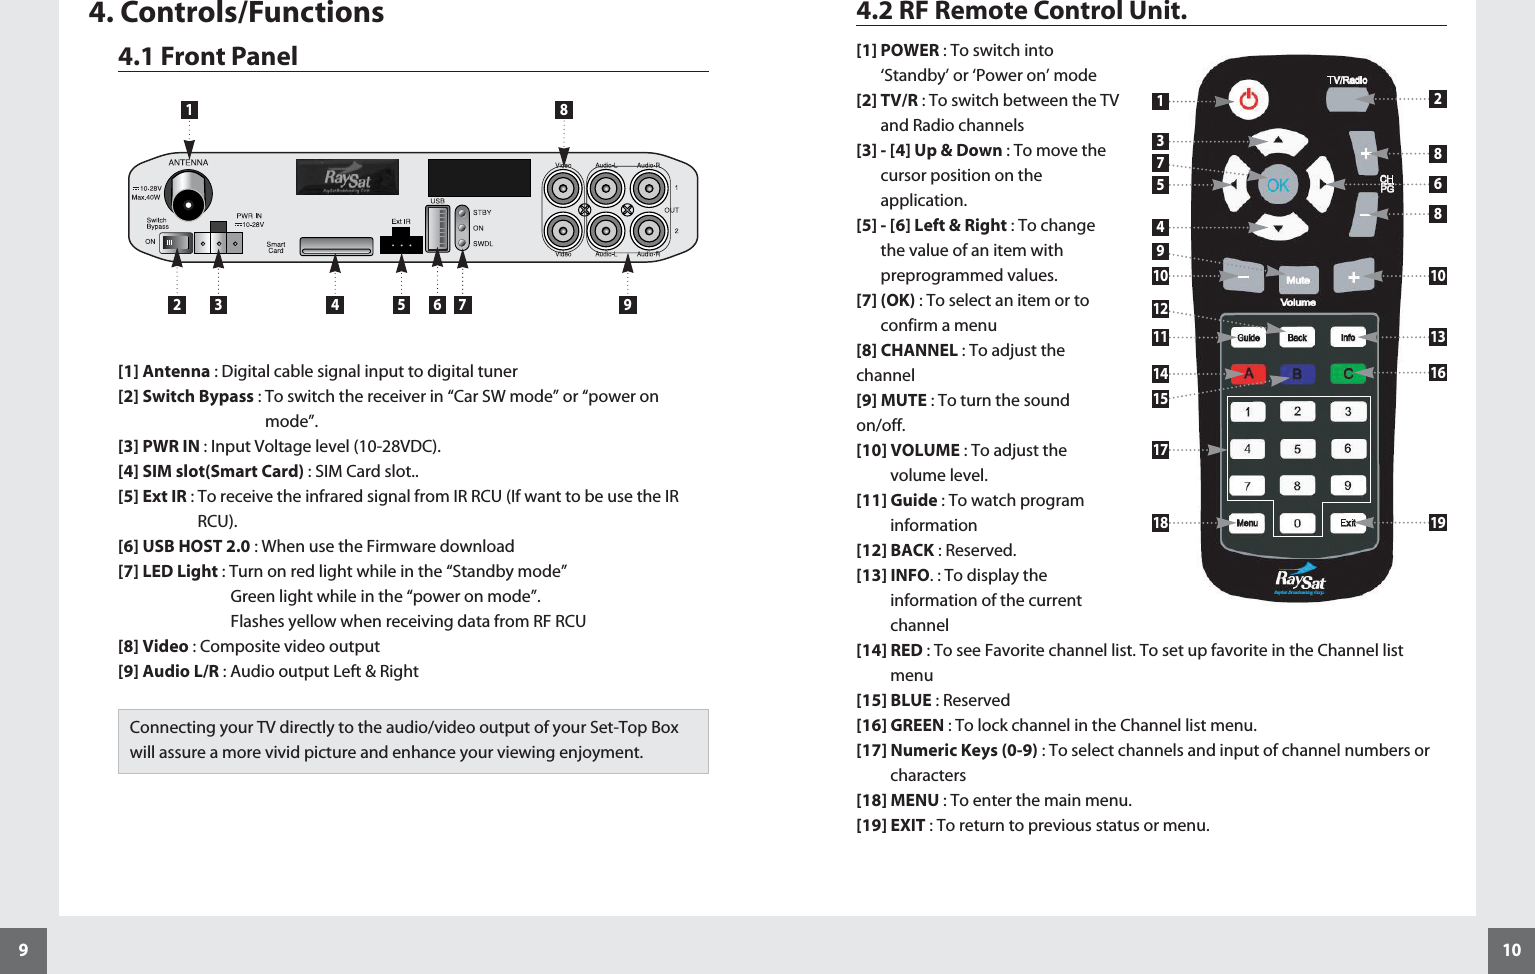 1094. Controls/Functions4.1 Front Panel[1] Antenna : Digital cable signal input to digital tuner[2] Switch Bypass : To switch the receiver in “Car SW mode” or “power onmode”.[3] PWR IN : Input Voltage level (10-28VDC).[4] SIM slot(Smart Card) : SIM Card slot..[5] Ext IR : To receive the infrared signal from IR RCU (If want to be use the IRRCU).[6] USB HOST 2.0 : When use the Firmware download [7] LED Light : Turn on red light while in the “Standby mode” Green light while in the “power on mode”.Flashes yellow when receiving data from RF RCU[8] Video : Composite video output [9] Audio L/R : Audio output Left &amp; Right 1 82 3 4 5 6 7 9Connecting your TV directly to the audio/video output of your Set-Top Boxwill assure a more vivid picture and enhance your viewing enjoyment.4.2 RF Remote Control Unit.[1] POWER : To switch into‘Standby’ or ‘Power on’ mode[2] TV/R : To switch between the TVand Radio channels[3] - [4] Up &amp; Down : To move thecursor position on theapplication. [5] - [6] Left &amp; Right : To changethe value of an item withpreprogrammed values.[7] (OK) : To select an item or toconfirm a menu[8] CHANNEL : To adjust thechannel[9] MUTE : To turn the soundon/off. [10] VOLUME : To adjust thevolume level. [11] Guide : To watch programinformation[12] BACK : Reserved.[13] INFO. : To display theinformation of the currentchannel[14] RED : To see Favorite channel list. To set up favorite in the Channel listmenu[15] BLUE : Reserved[16] GREEN : To lock channel in the Channel list menu. [17] Numeric Keys (0-9) : To select channels and input of channel numbers orcharacters[18] MENU : To enter the main menu. [19] EXIT : To return to previous status or menu. 79121513451011141718288610131619